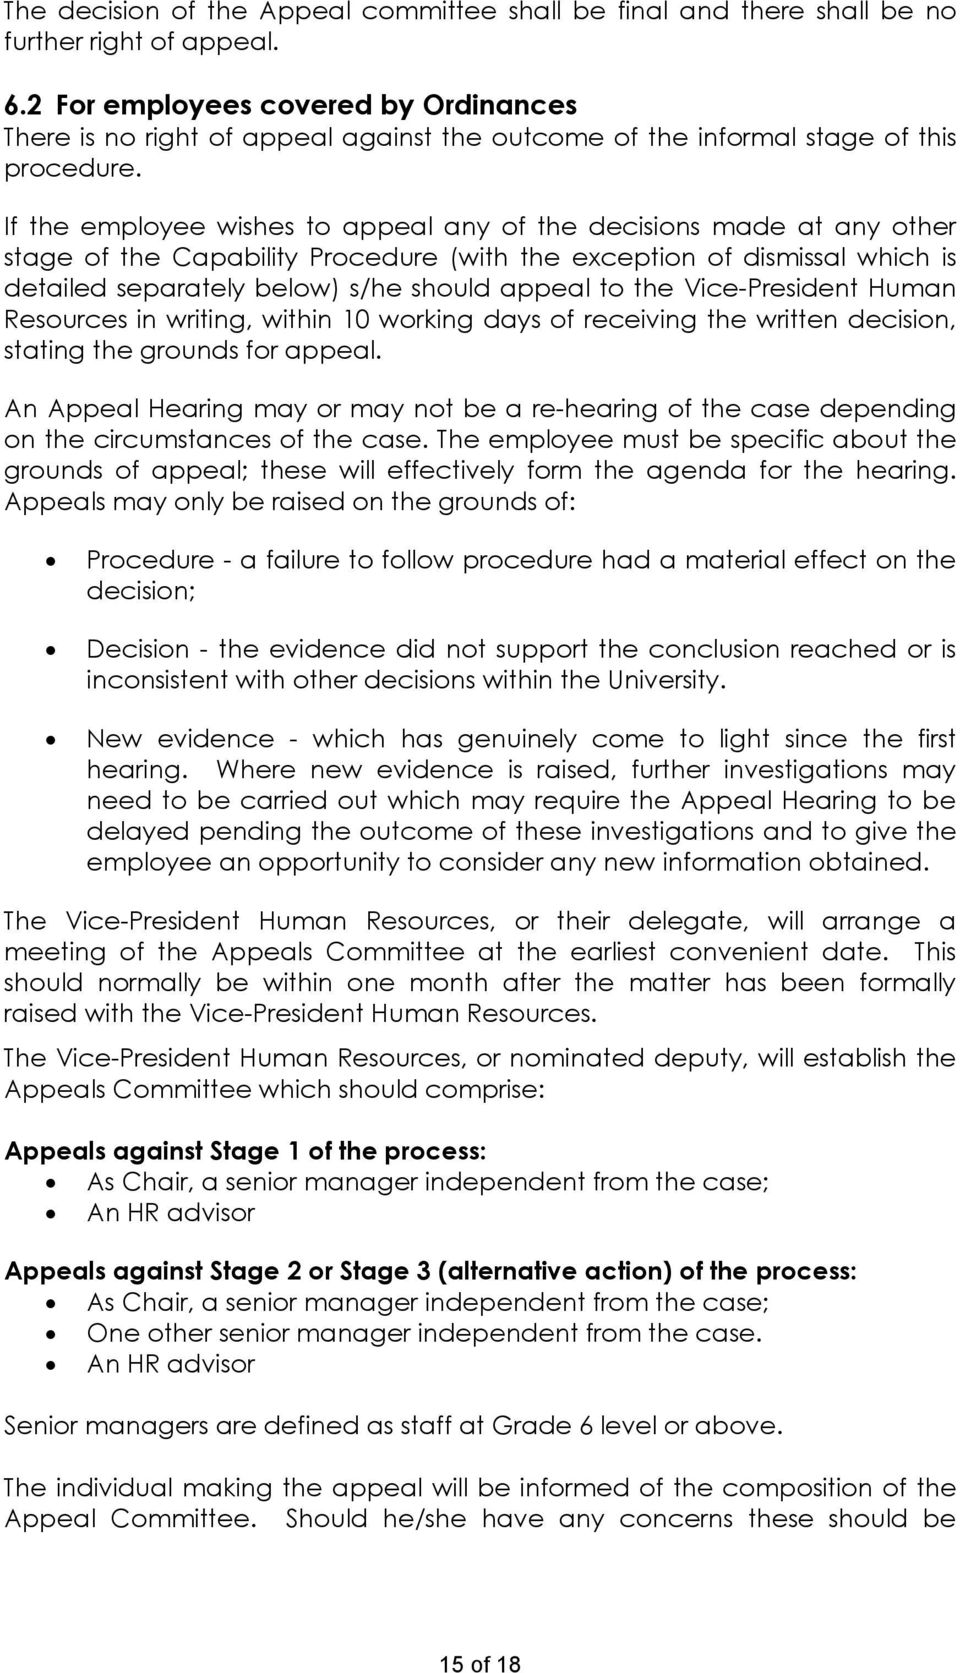 If the employee wishes to appeal any of the decisions made at any other stage of the Capability Procedure (with the exception of dismissal which is detailed separately below) s/he should appeal to